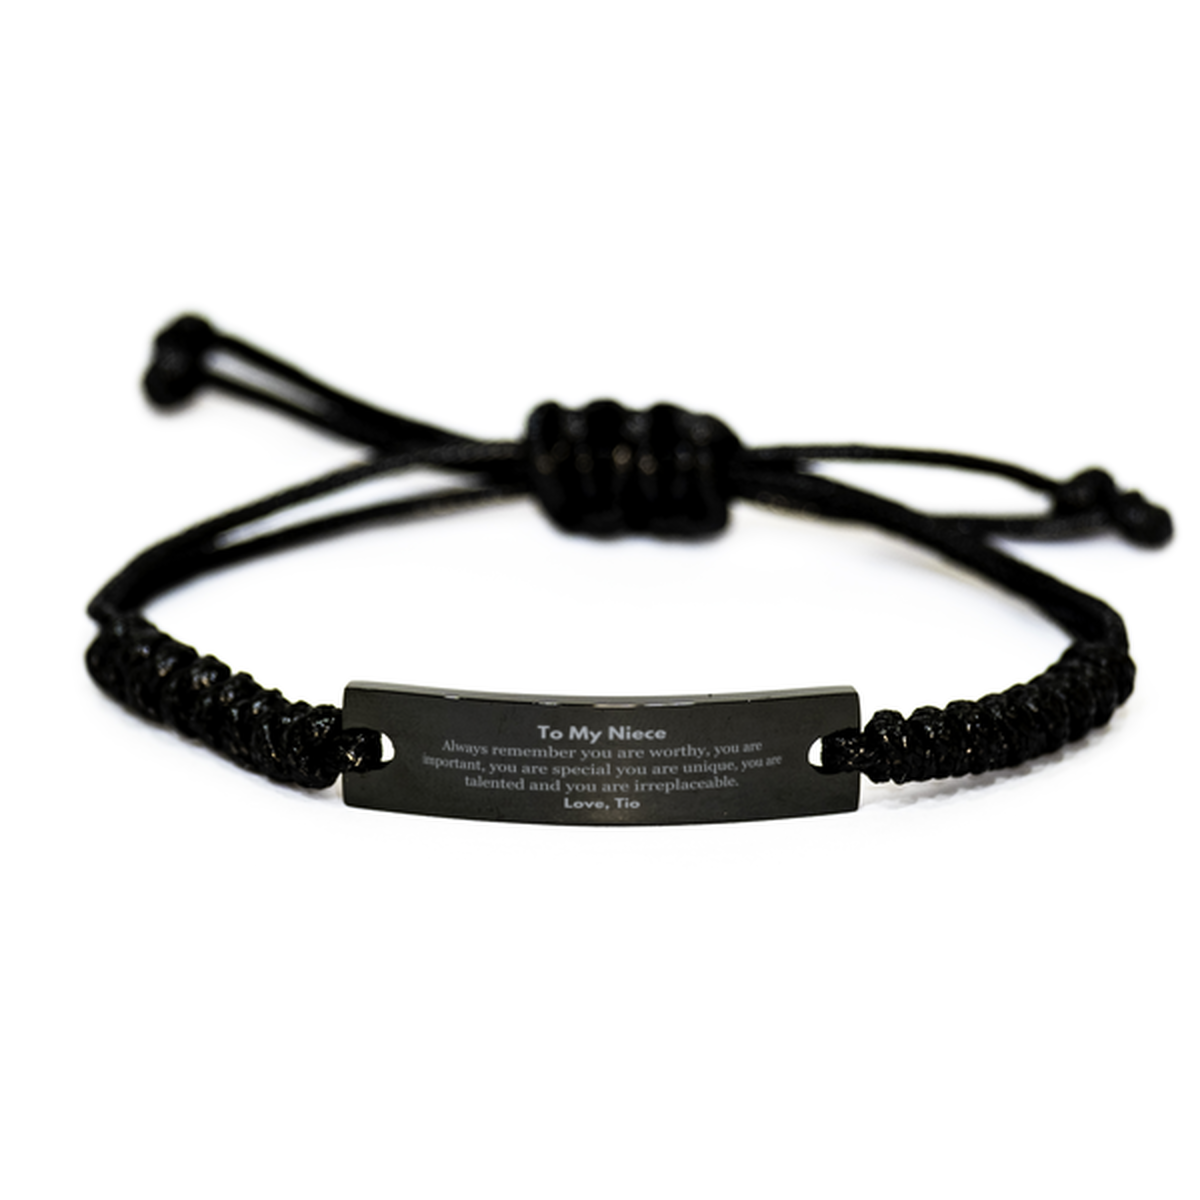 Niece Birthday Gifts from Tio, Inspirational Black Rope Bracelet for Niece Christmas Graduation Gifts for Niece Always remember you are worthy, you are important. Love, Tio